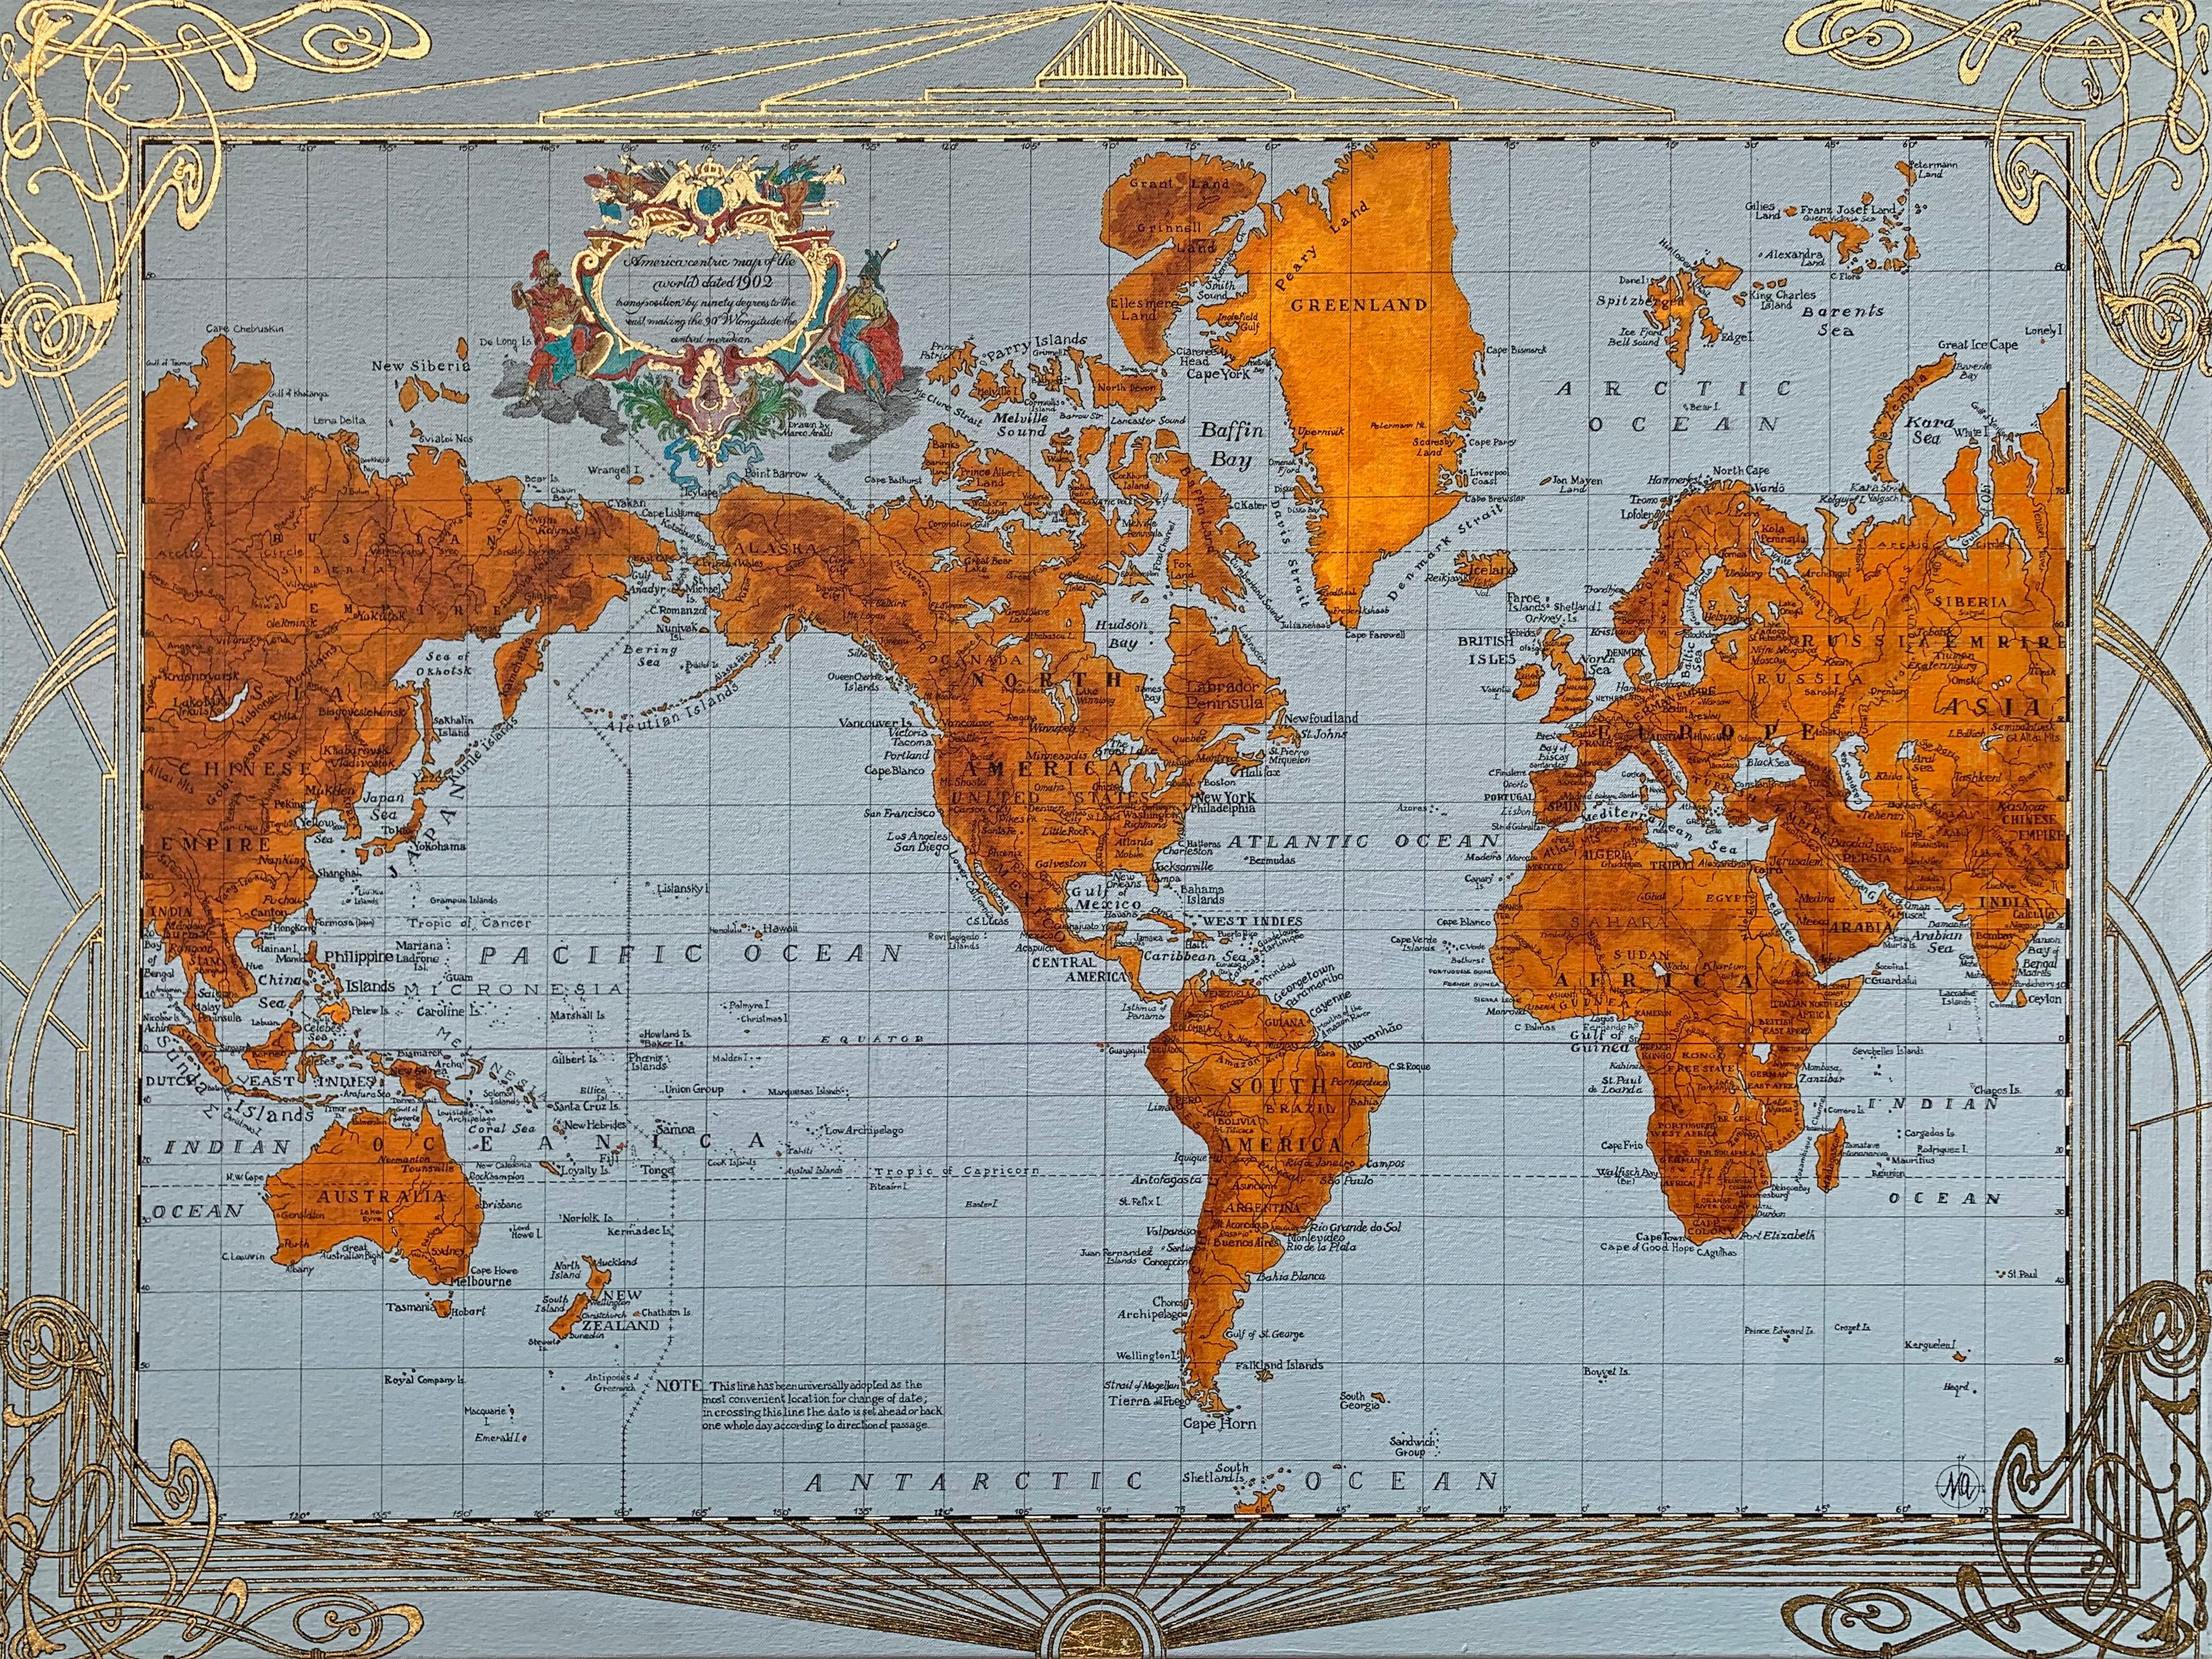 1902 Americacentric Map of the World - Painting, Mixed Media, Gilding, Ink, Map - Mixed Media Art by Marco Araldi